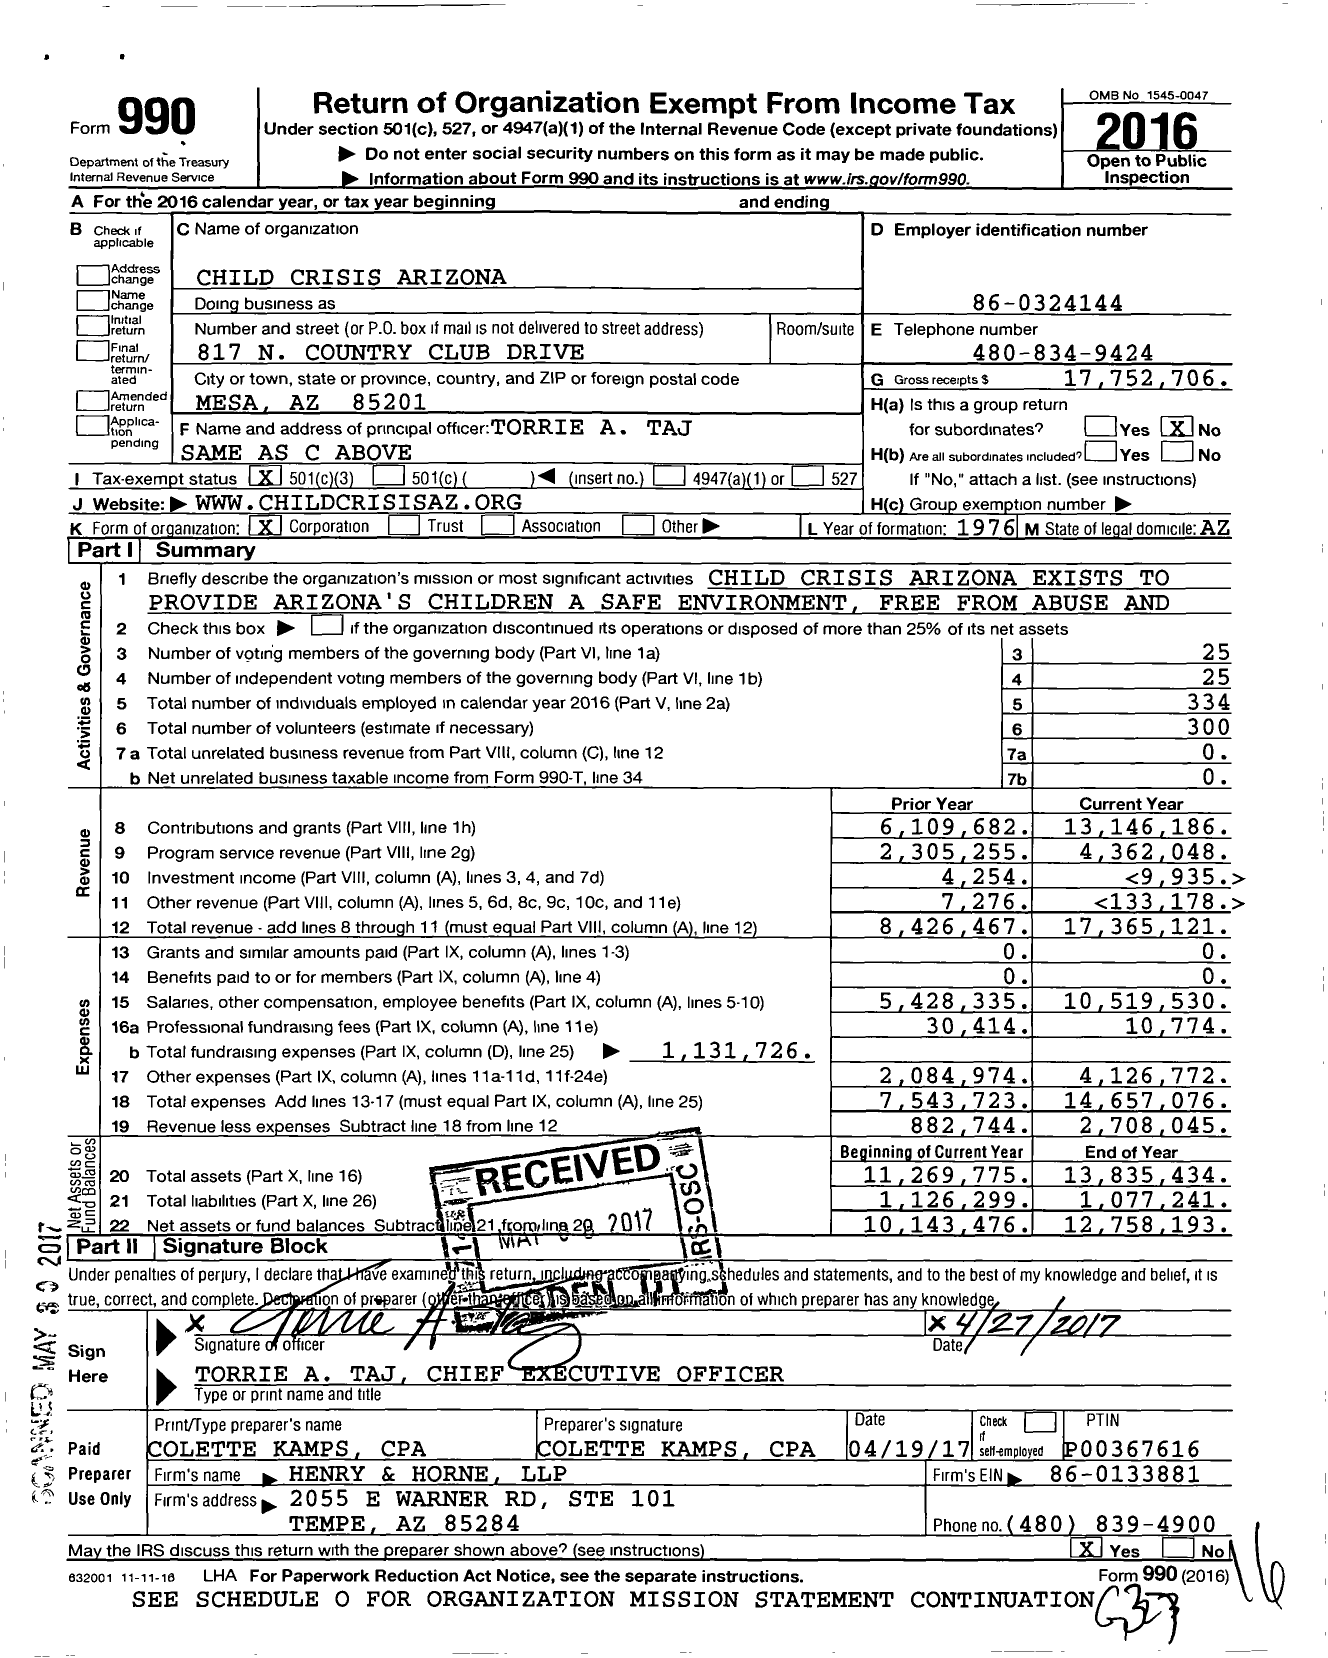 Image of first page of 2016 Form 990 for Child Crisis Arizona